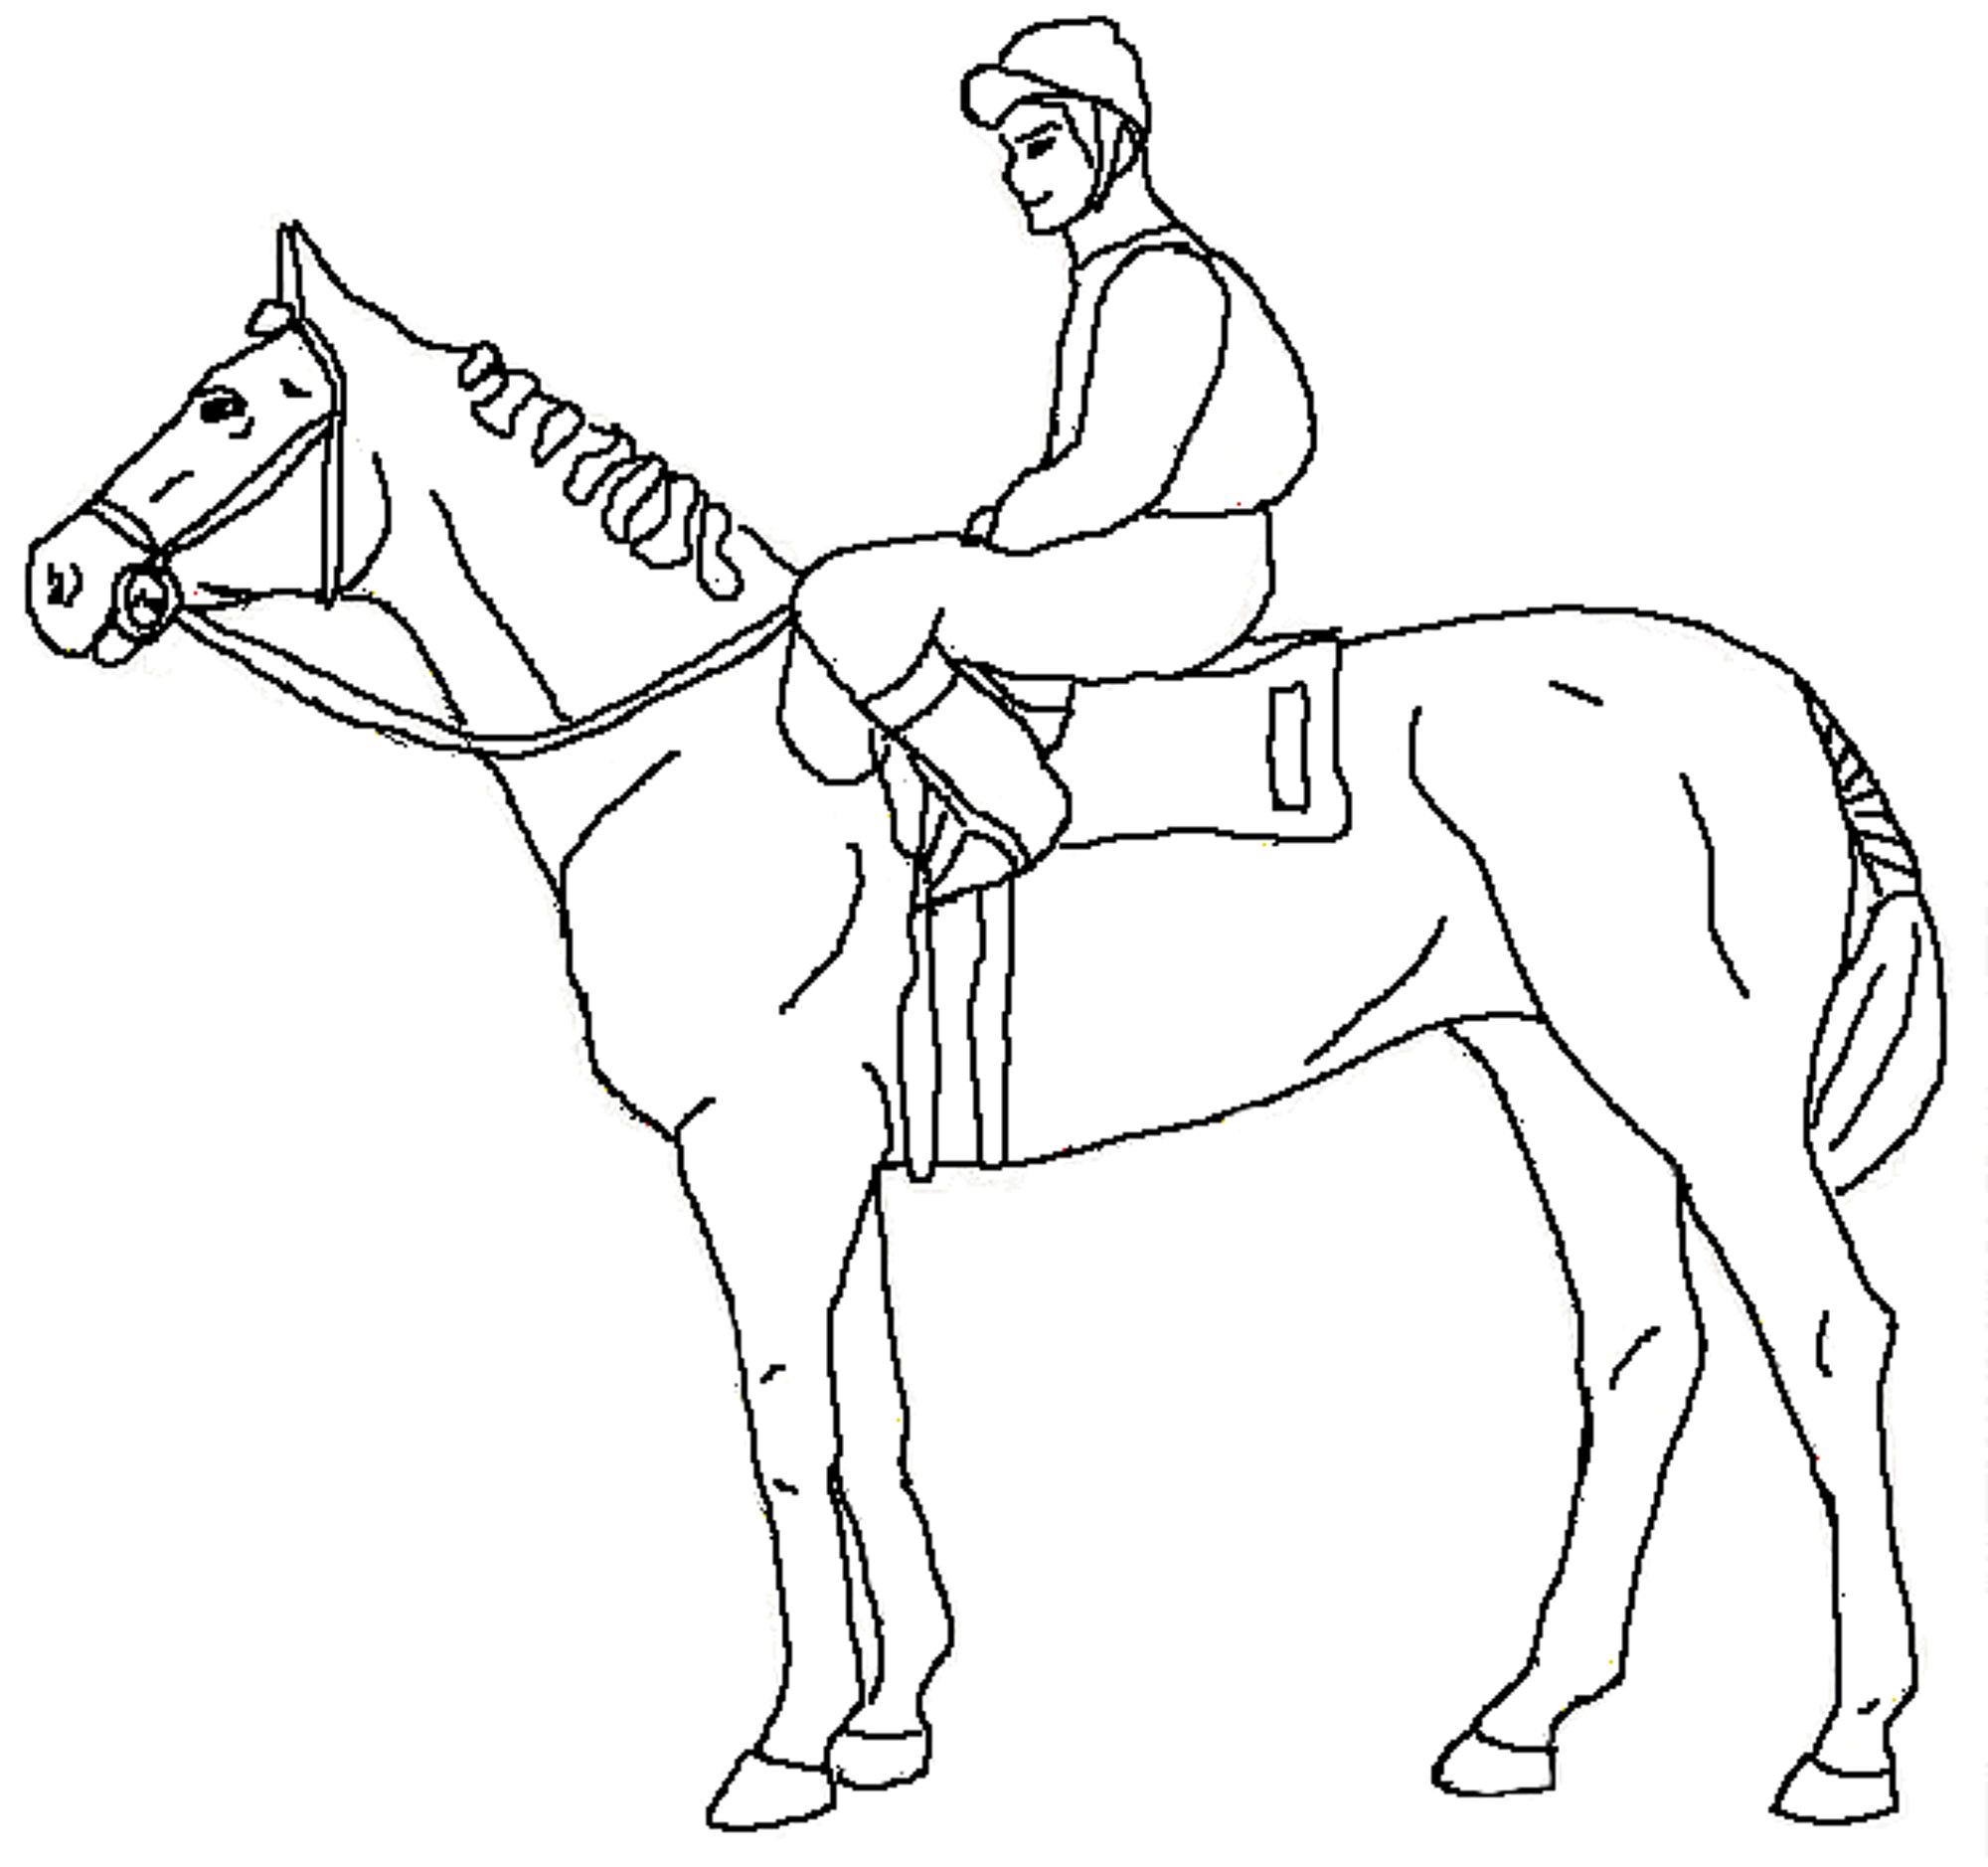 Horse And Rider Coloring Pages at GetColorings.com | Free ...